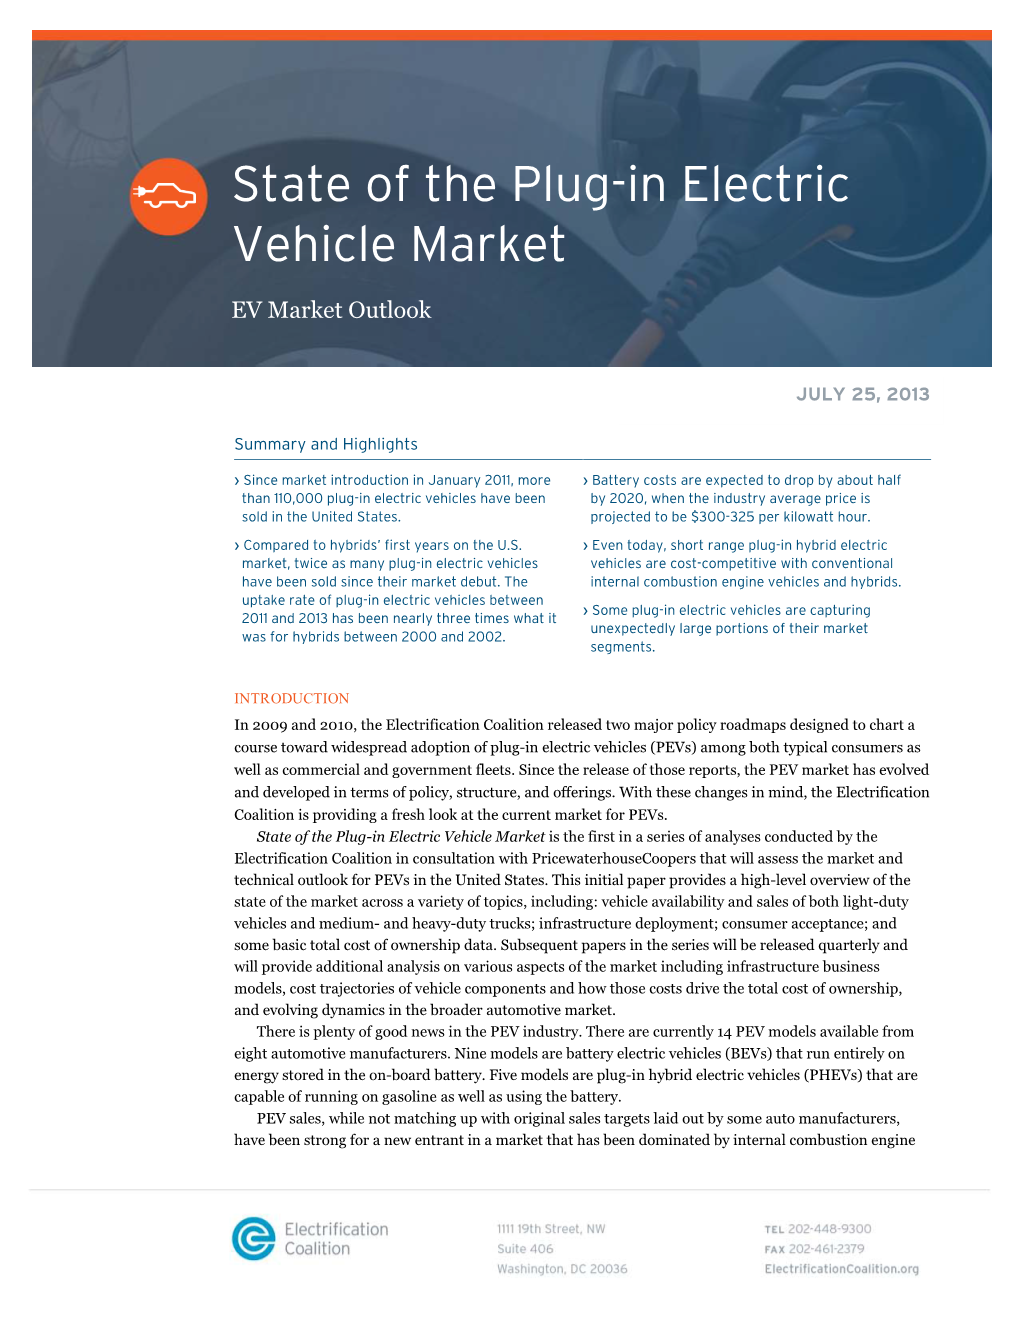 State of the Plug-In Electric Vehicle Market